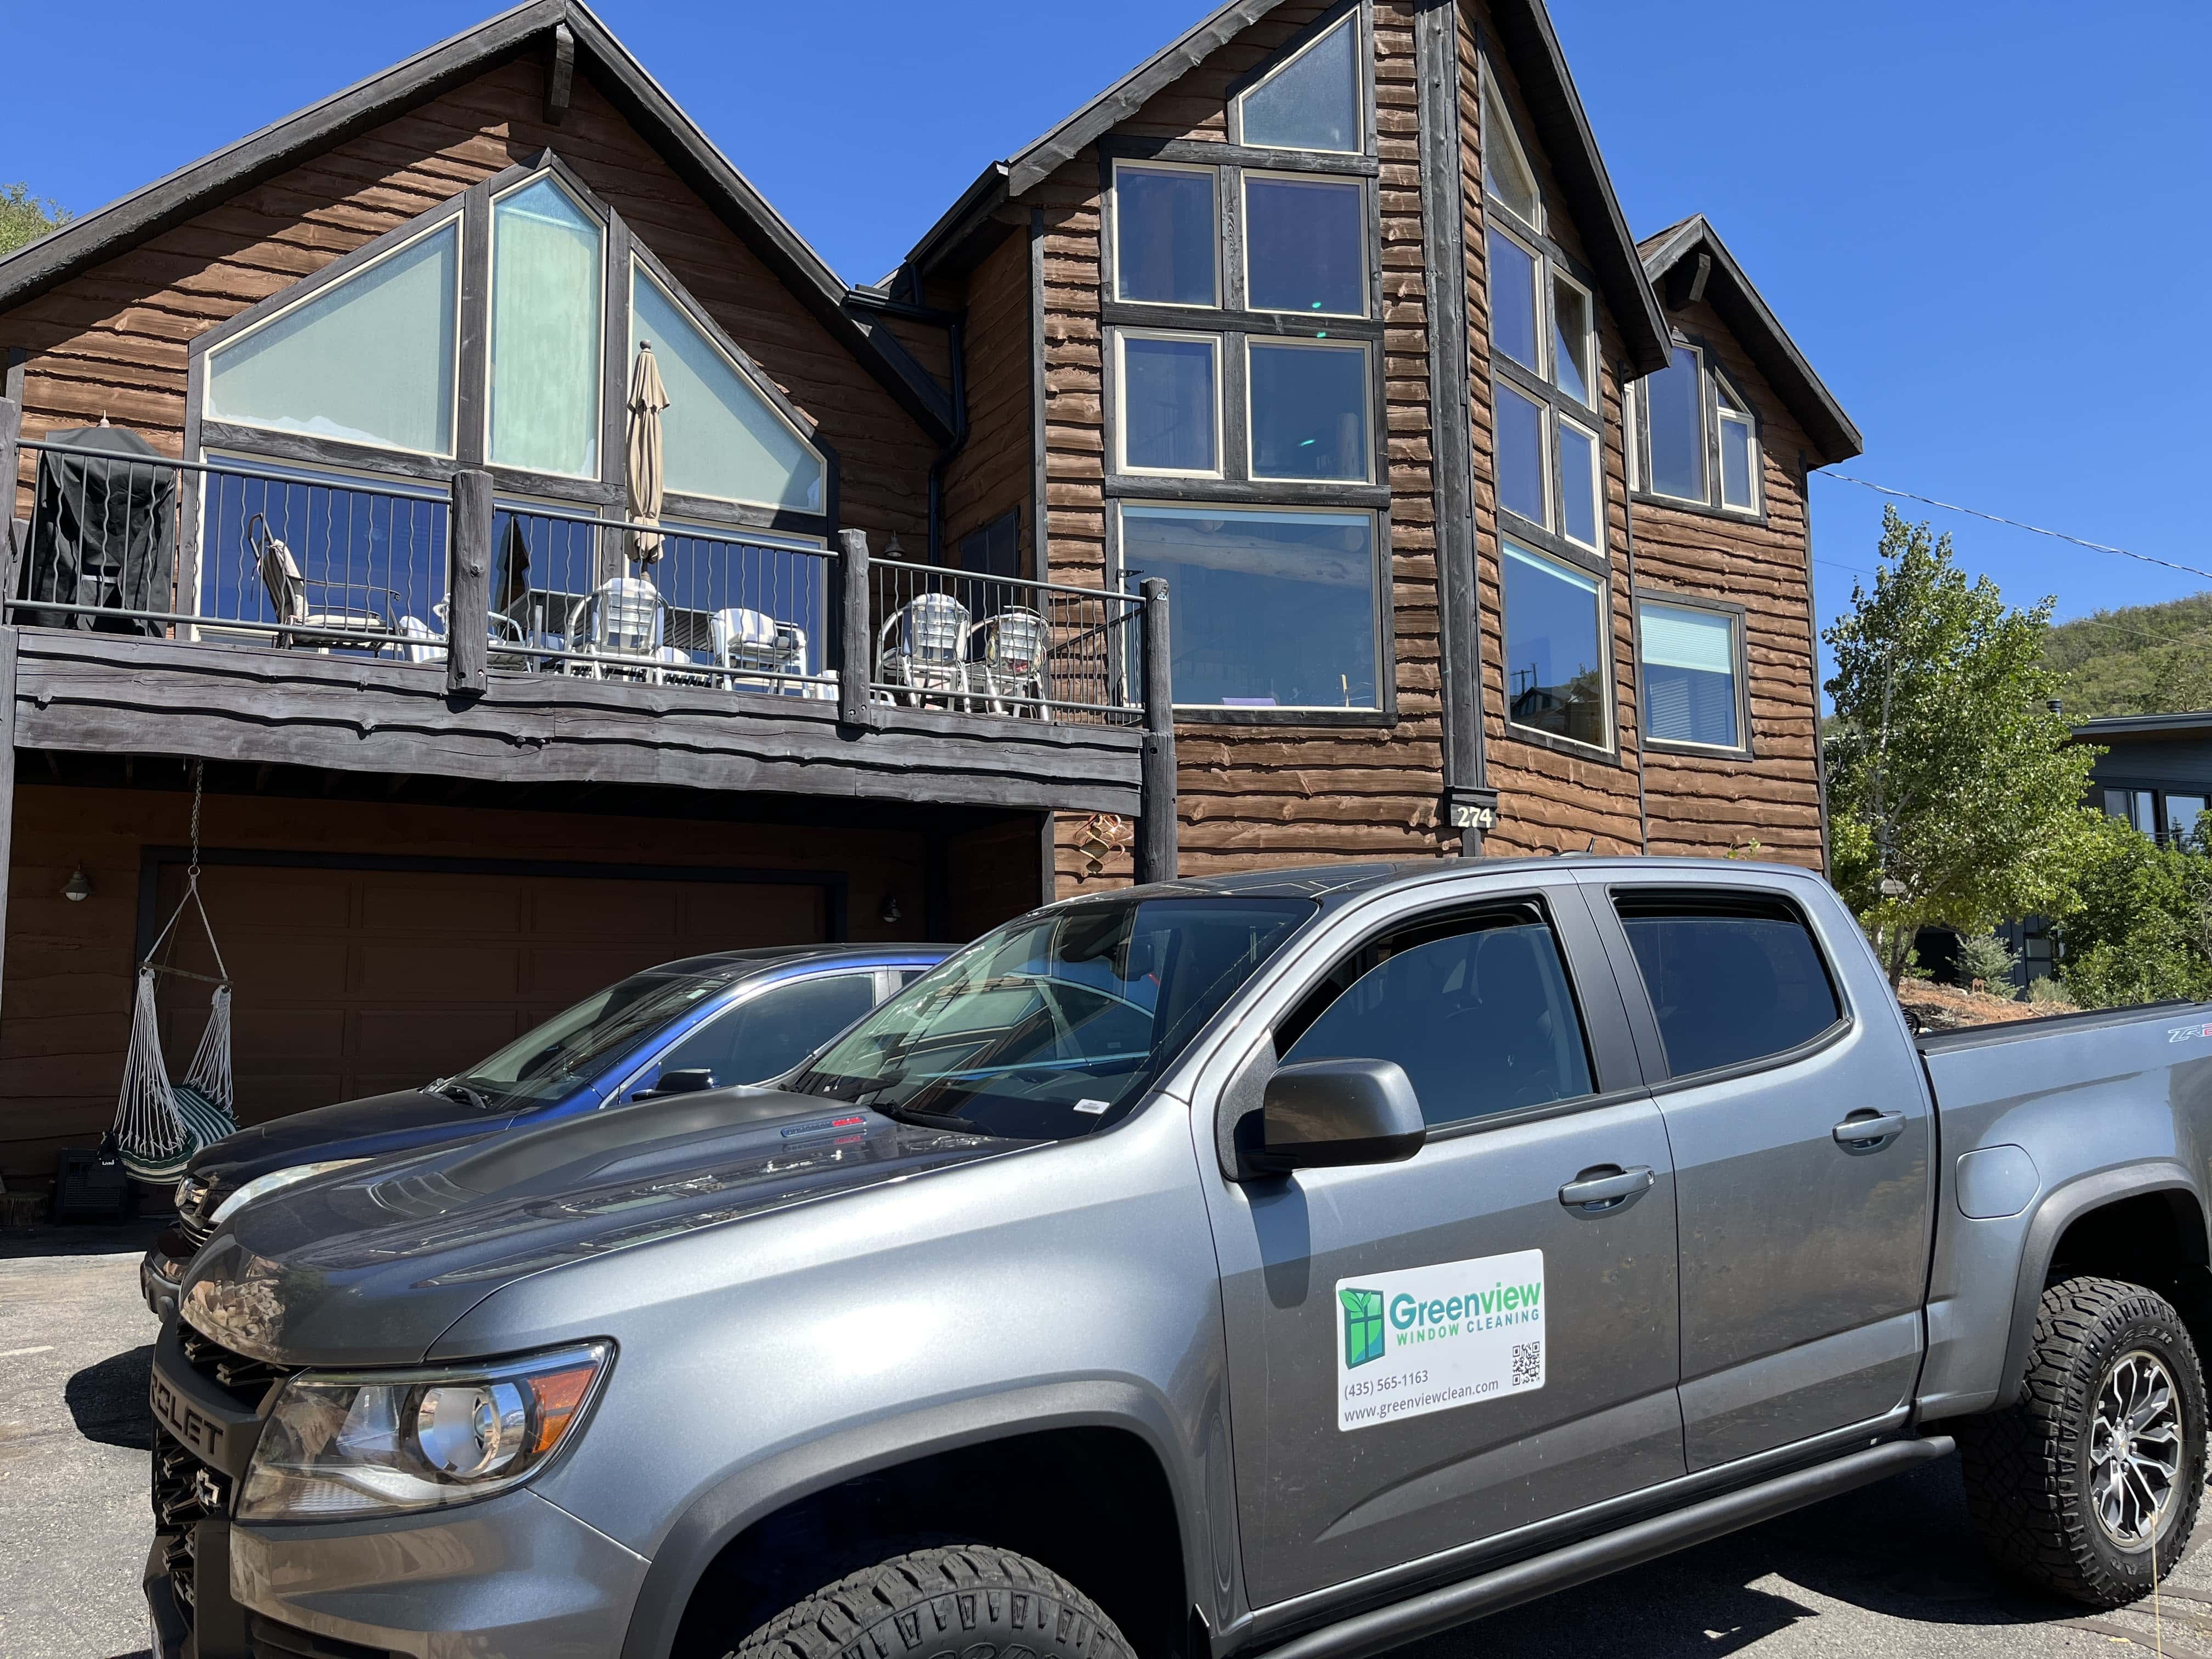 Greenview Window Cleaning - Park City, UT, US, best way to clean outside windows